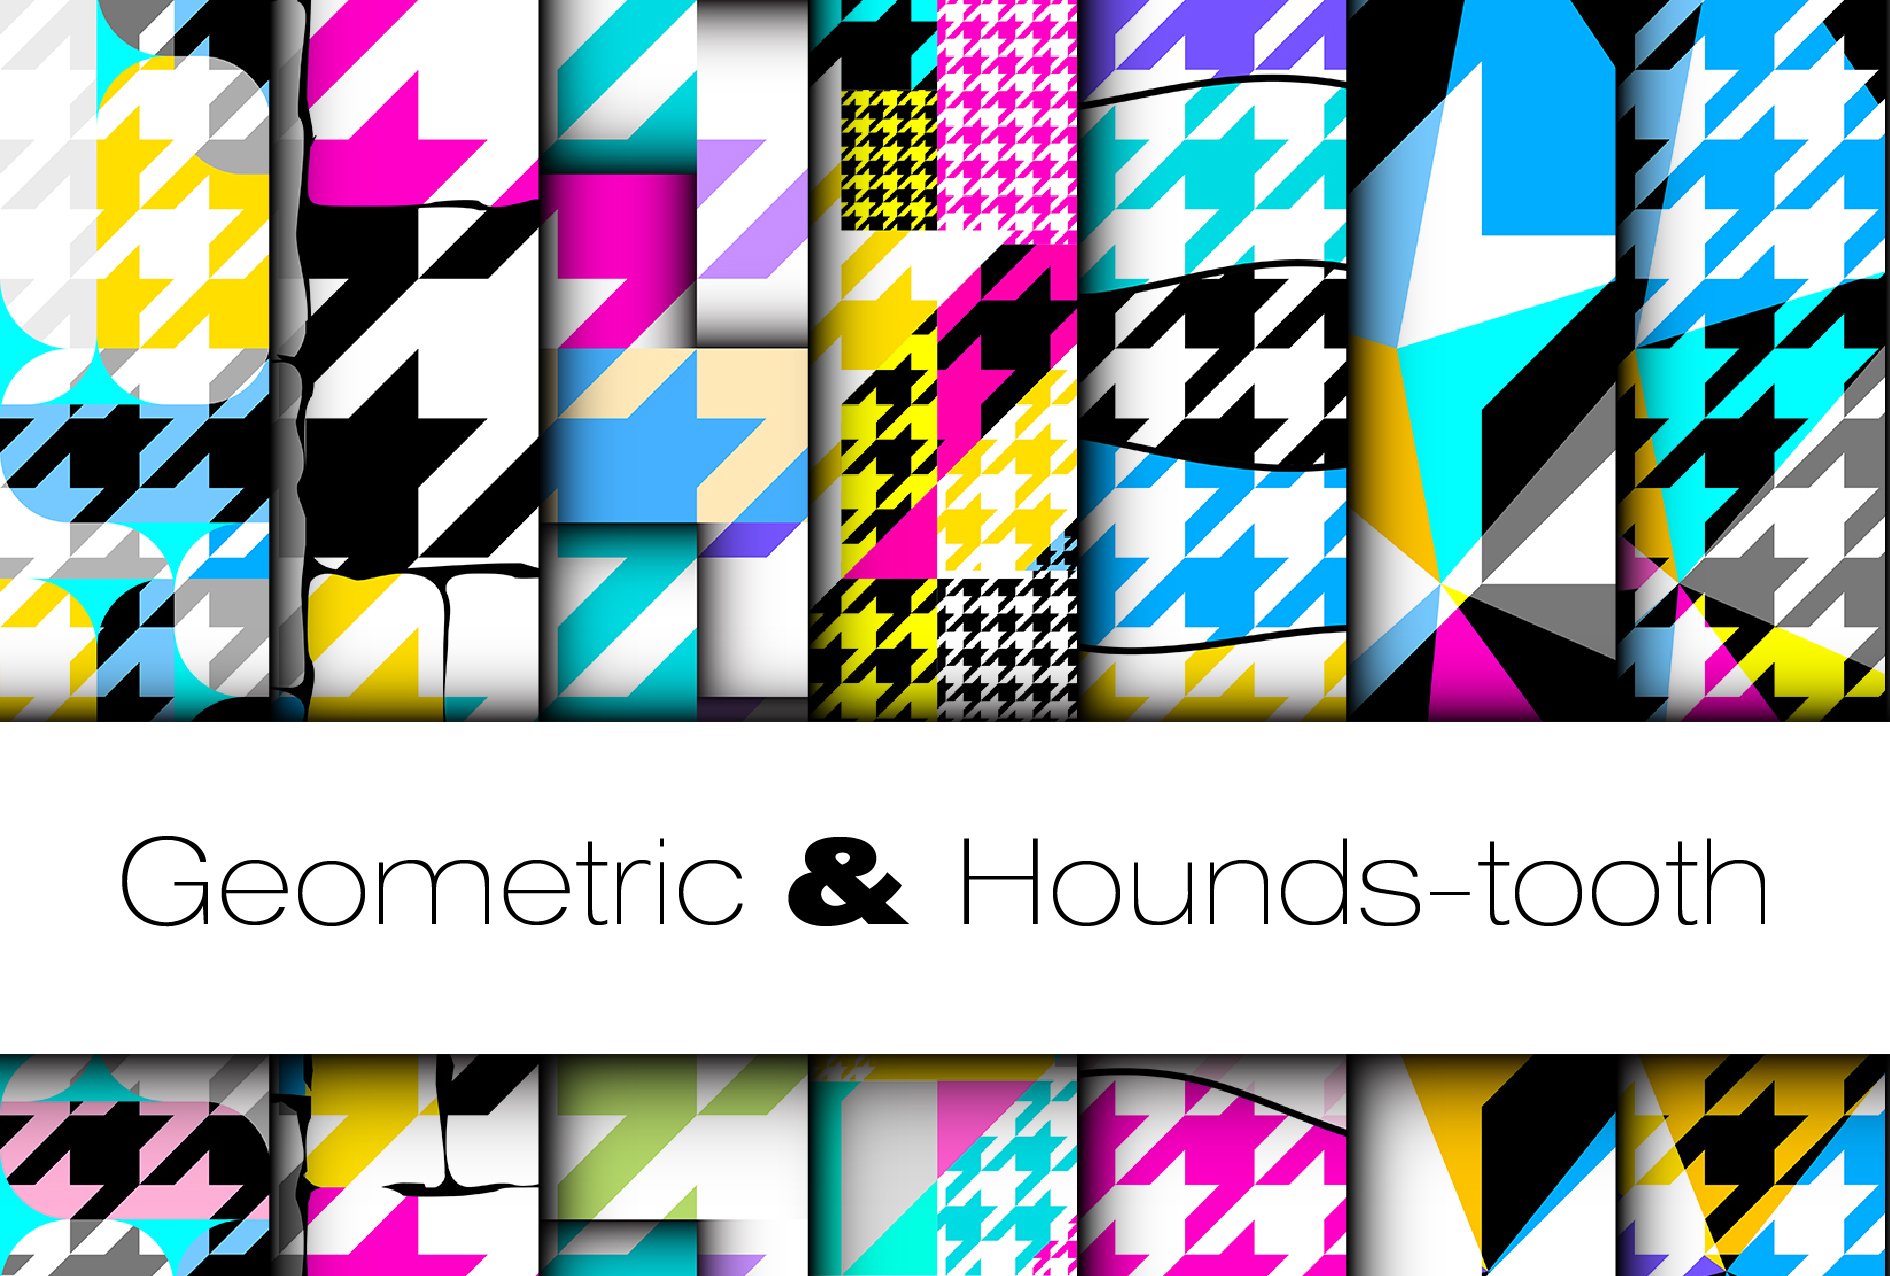 10 geometric hounds-tooth seamless cover image.